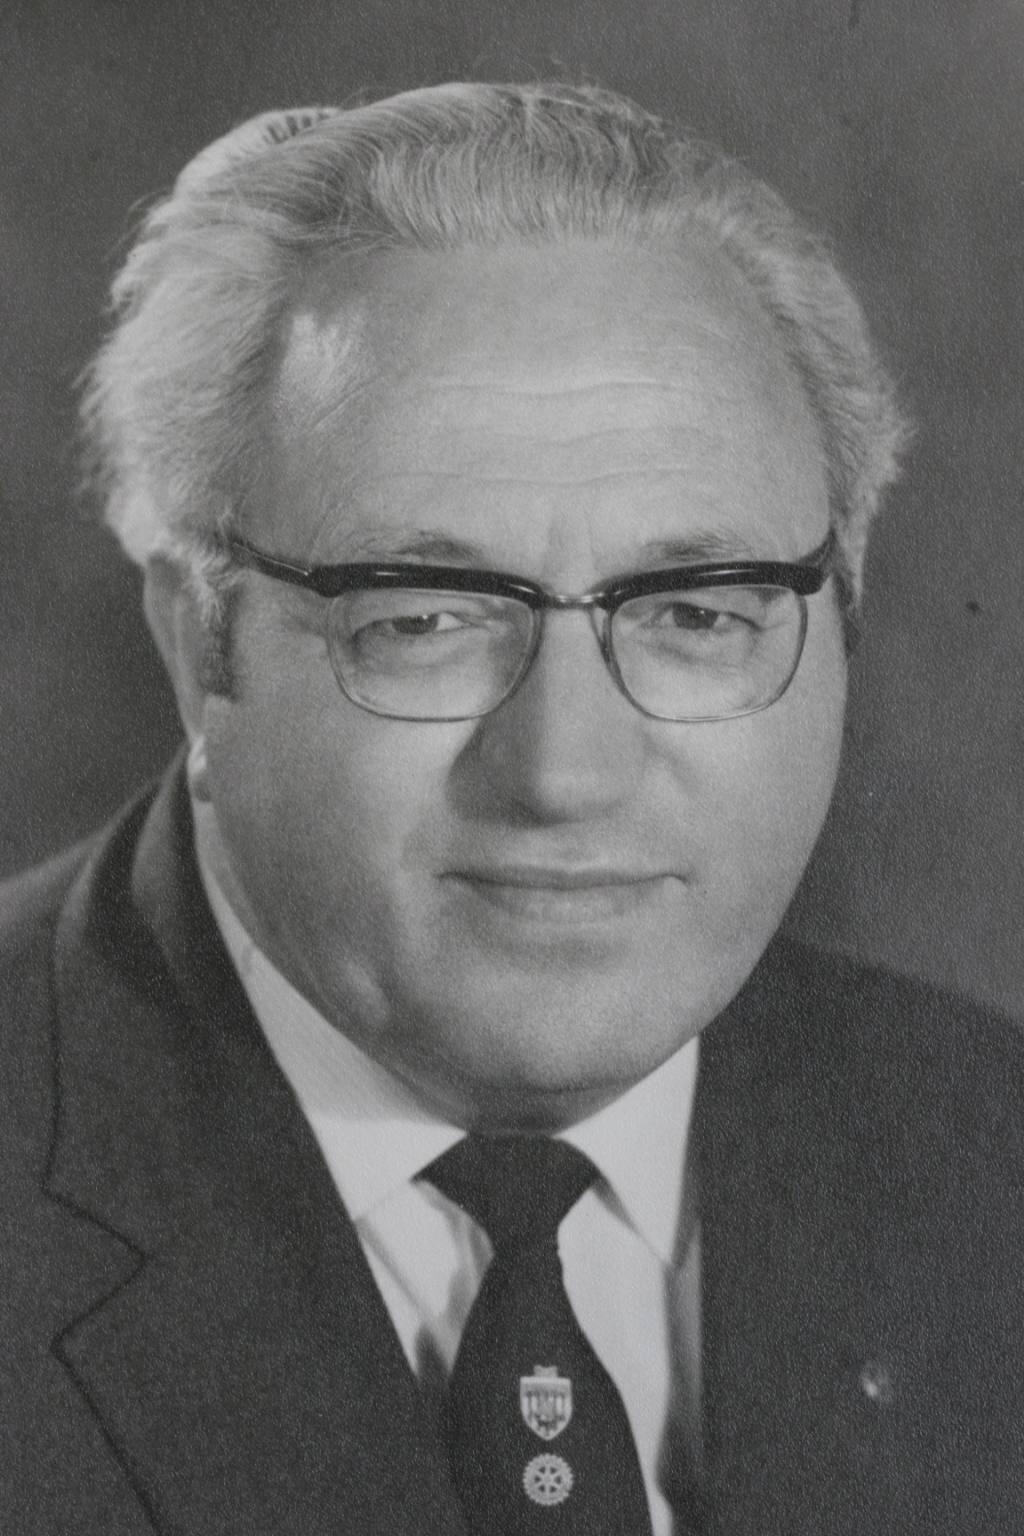 Past Presidents 1960-1969 (click here) - Albert Lord 1969/7